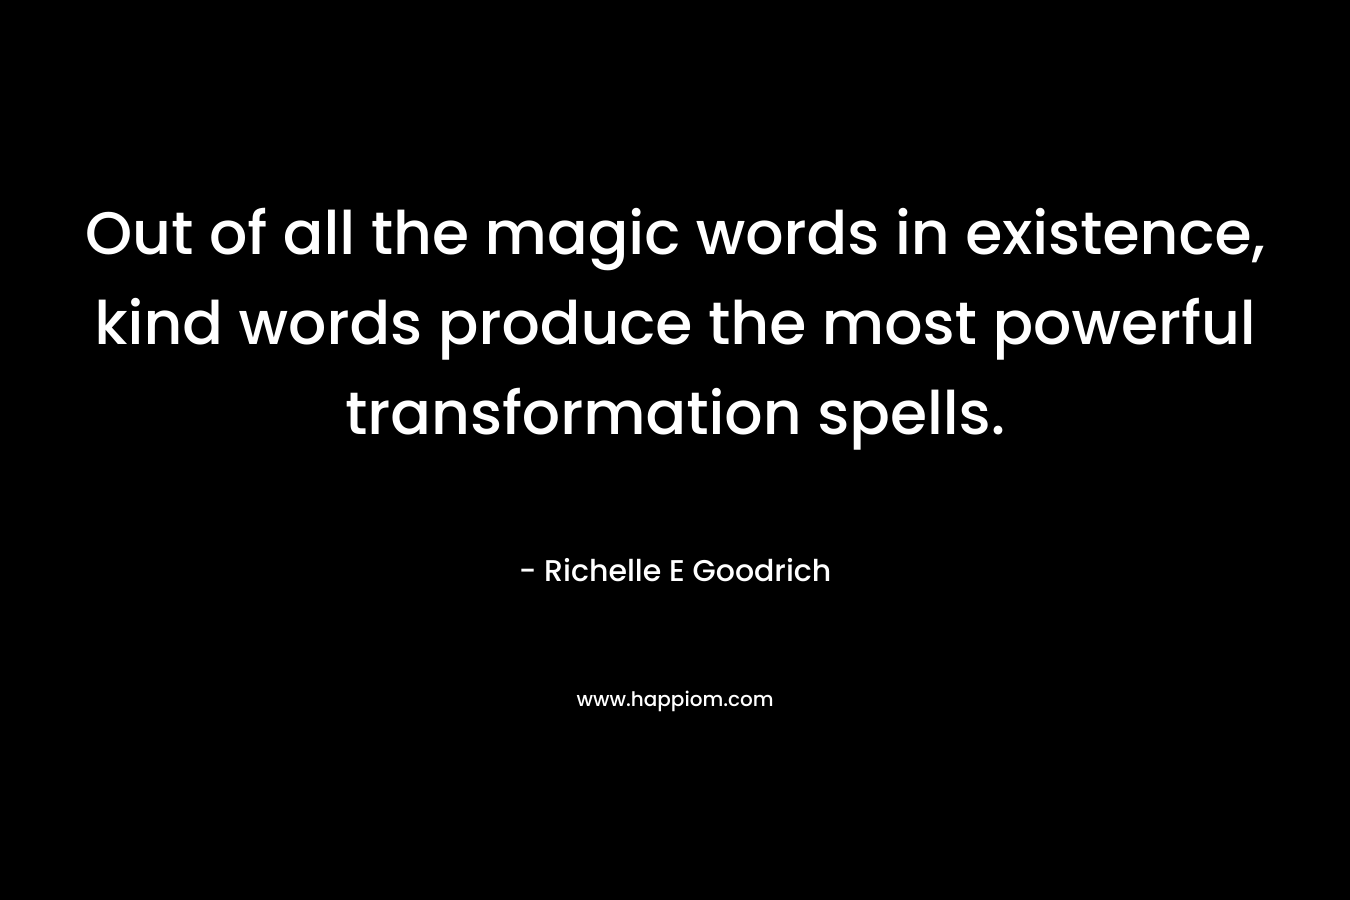 Out of all the magic words in existence, kind words produce the most powerful transformation spells. – Richelle E Goodrich